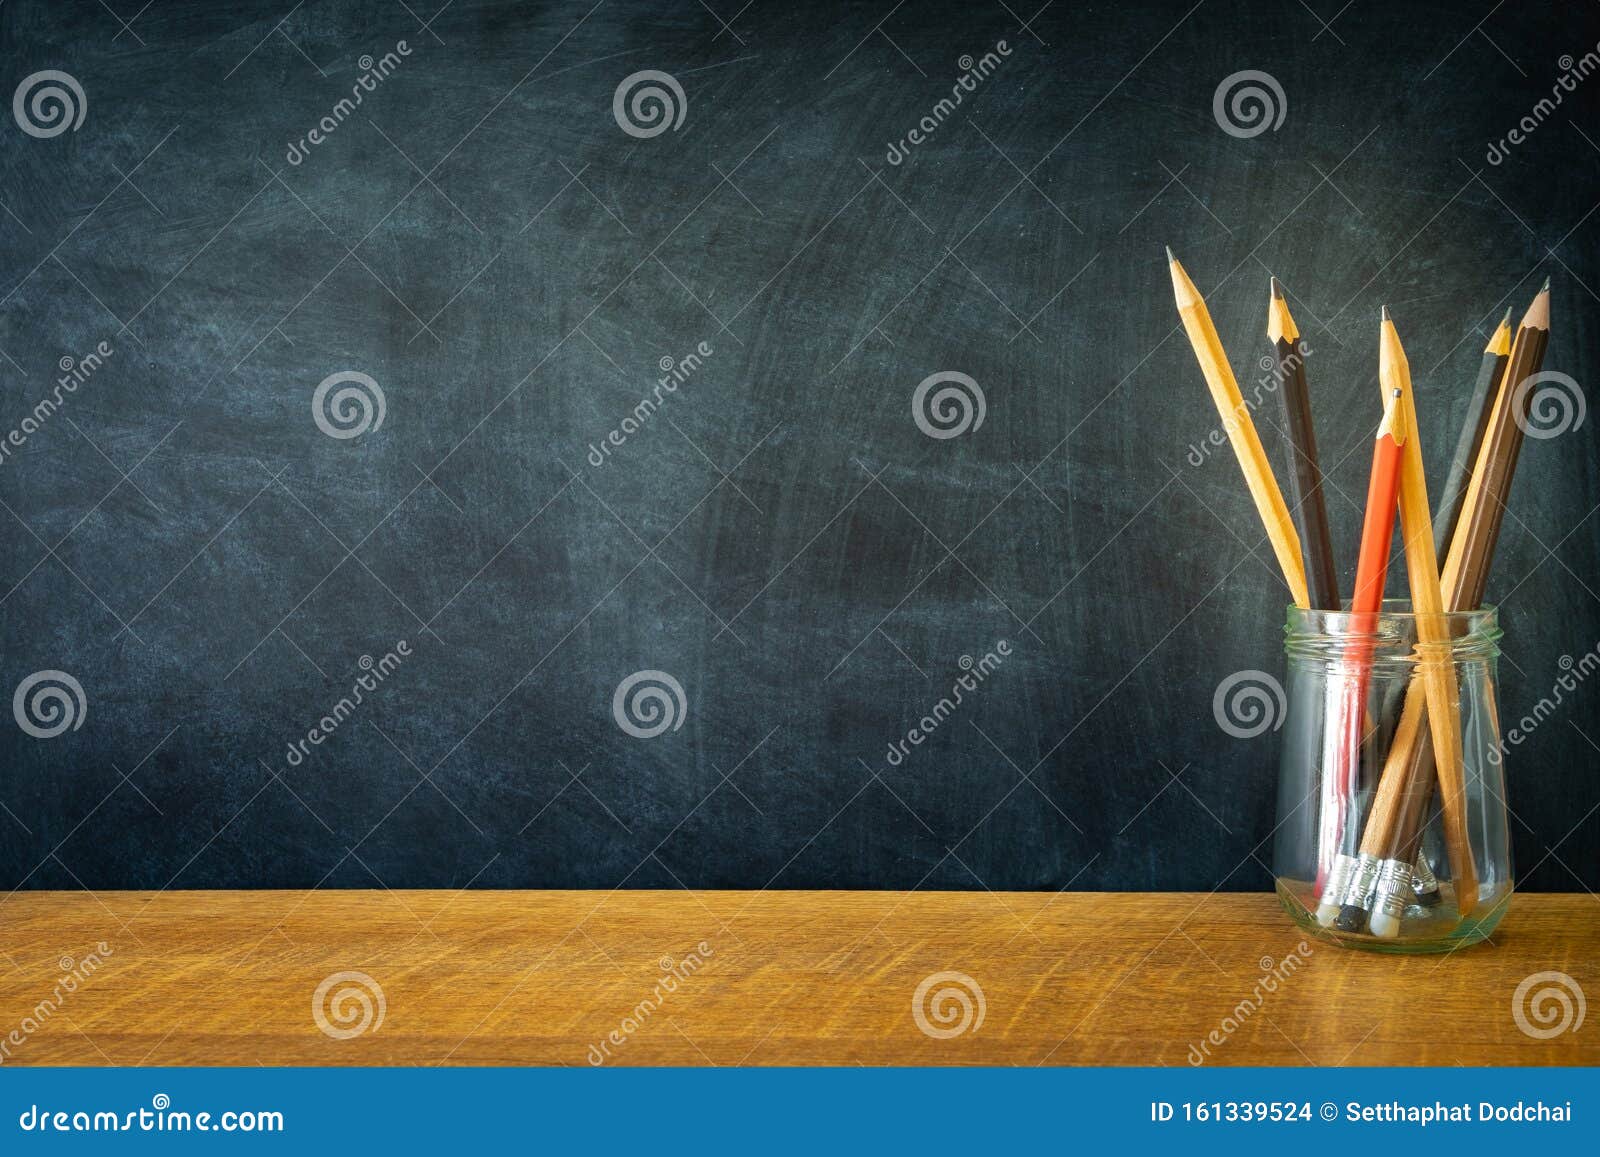 29,830 Education Border Stock Photos - Free & Royalty-Free Stock Photos  from Dreamstime